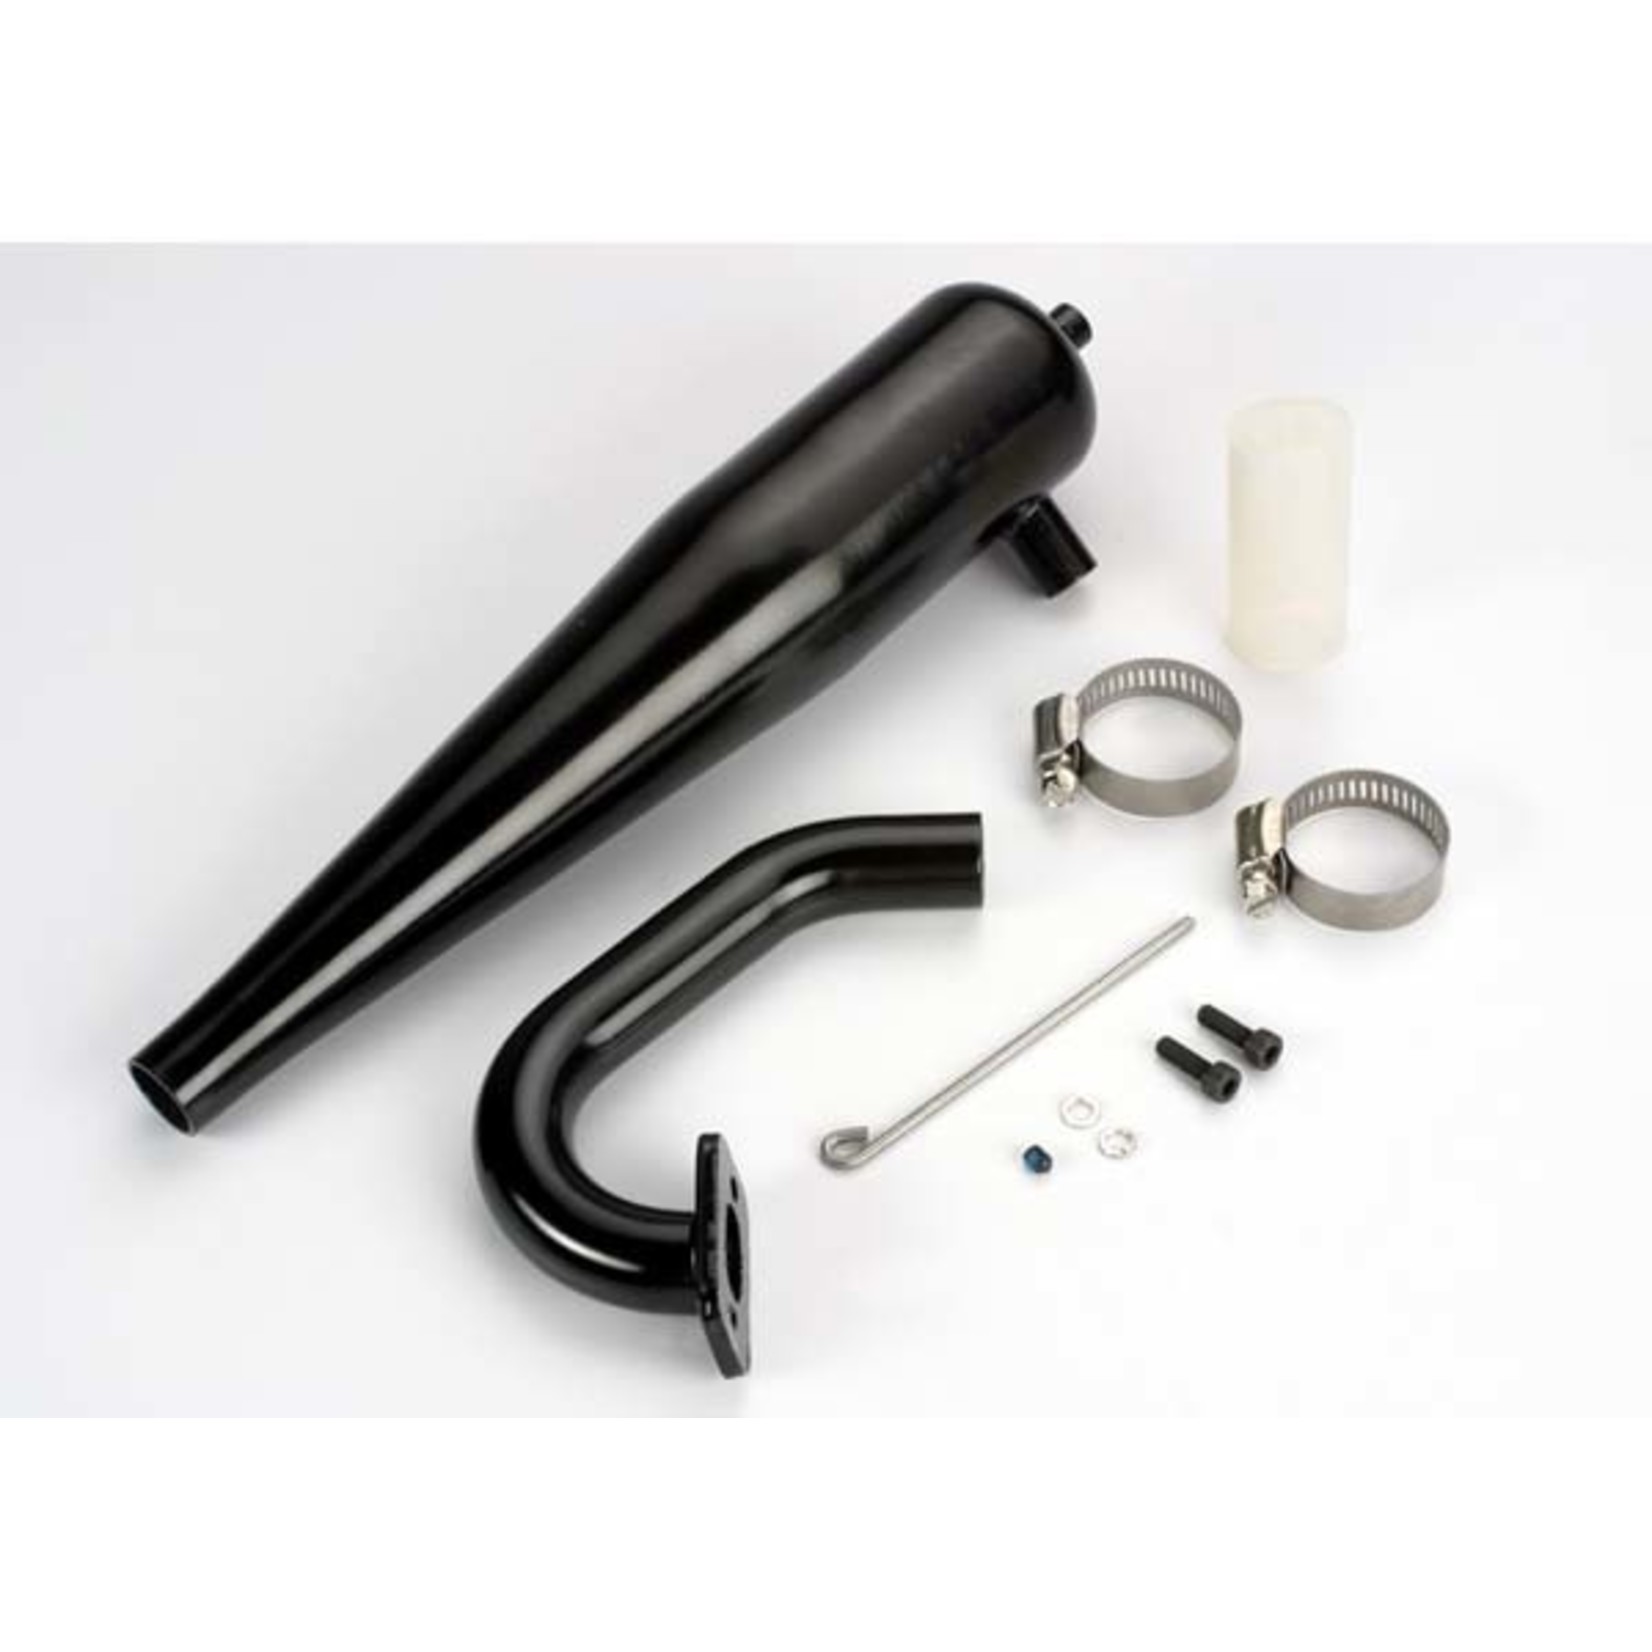 Traxxas 6150 - Performance-tuned exhaust system